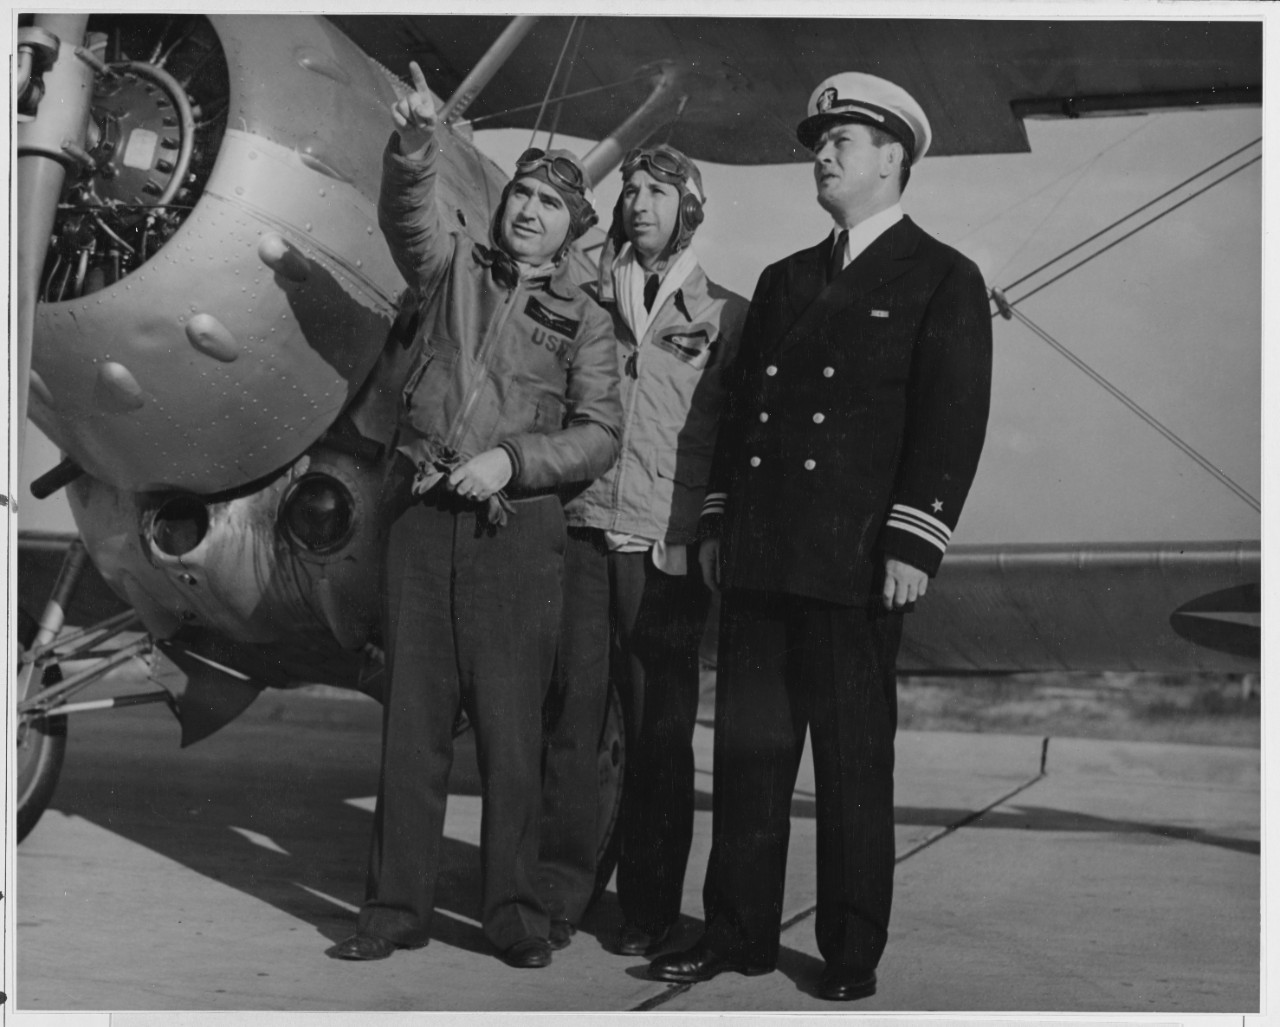 Comdr. W. G. Switzer, (left) Officer in charge, Aviation Cadet Regiment at the Naval Air Station Pensacola, Florida and Lt. Comdr D.D. Wilcox, (center) officer -in charge, Cadet regiment at the New Naval Air Station, Corpus Christi Texas, explains the finer points of flying to Lt. Comdr. J.J. (Gene) Tunney the Navy's new athletic director, at the Naval  Air Station, Pensacola, Fla.